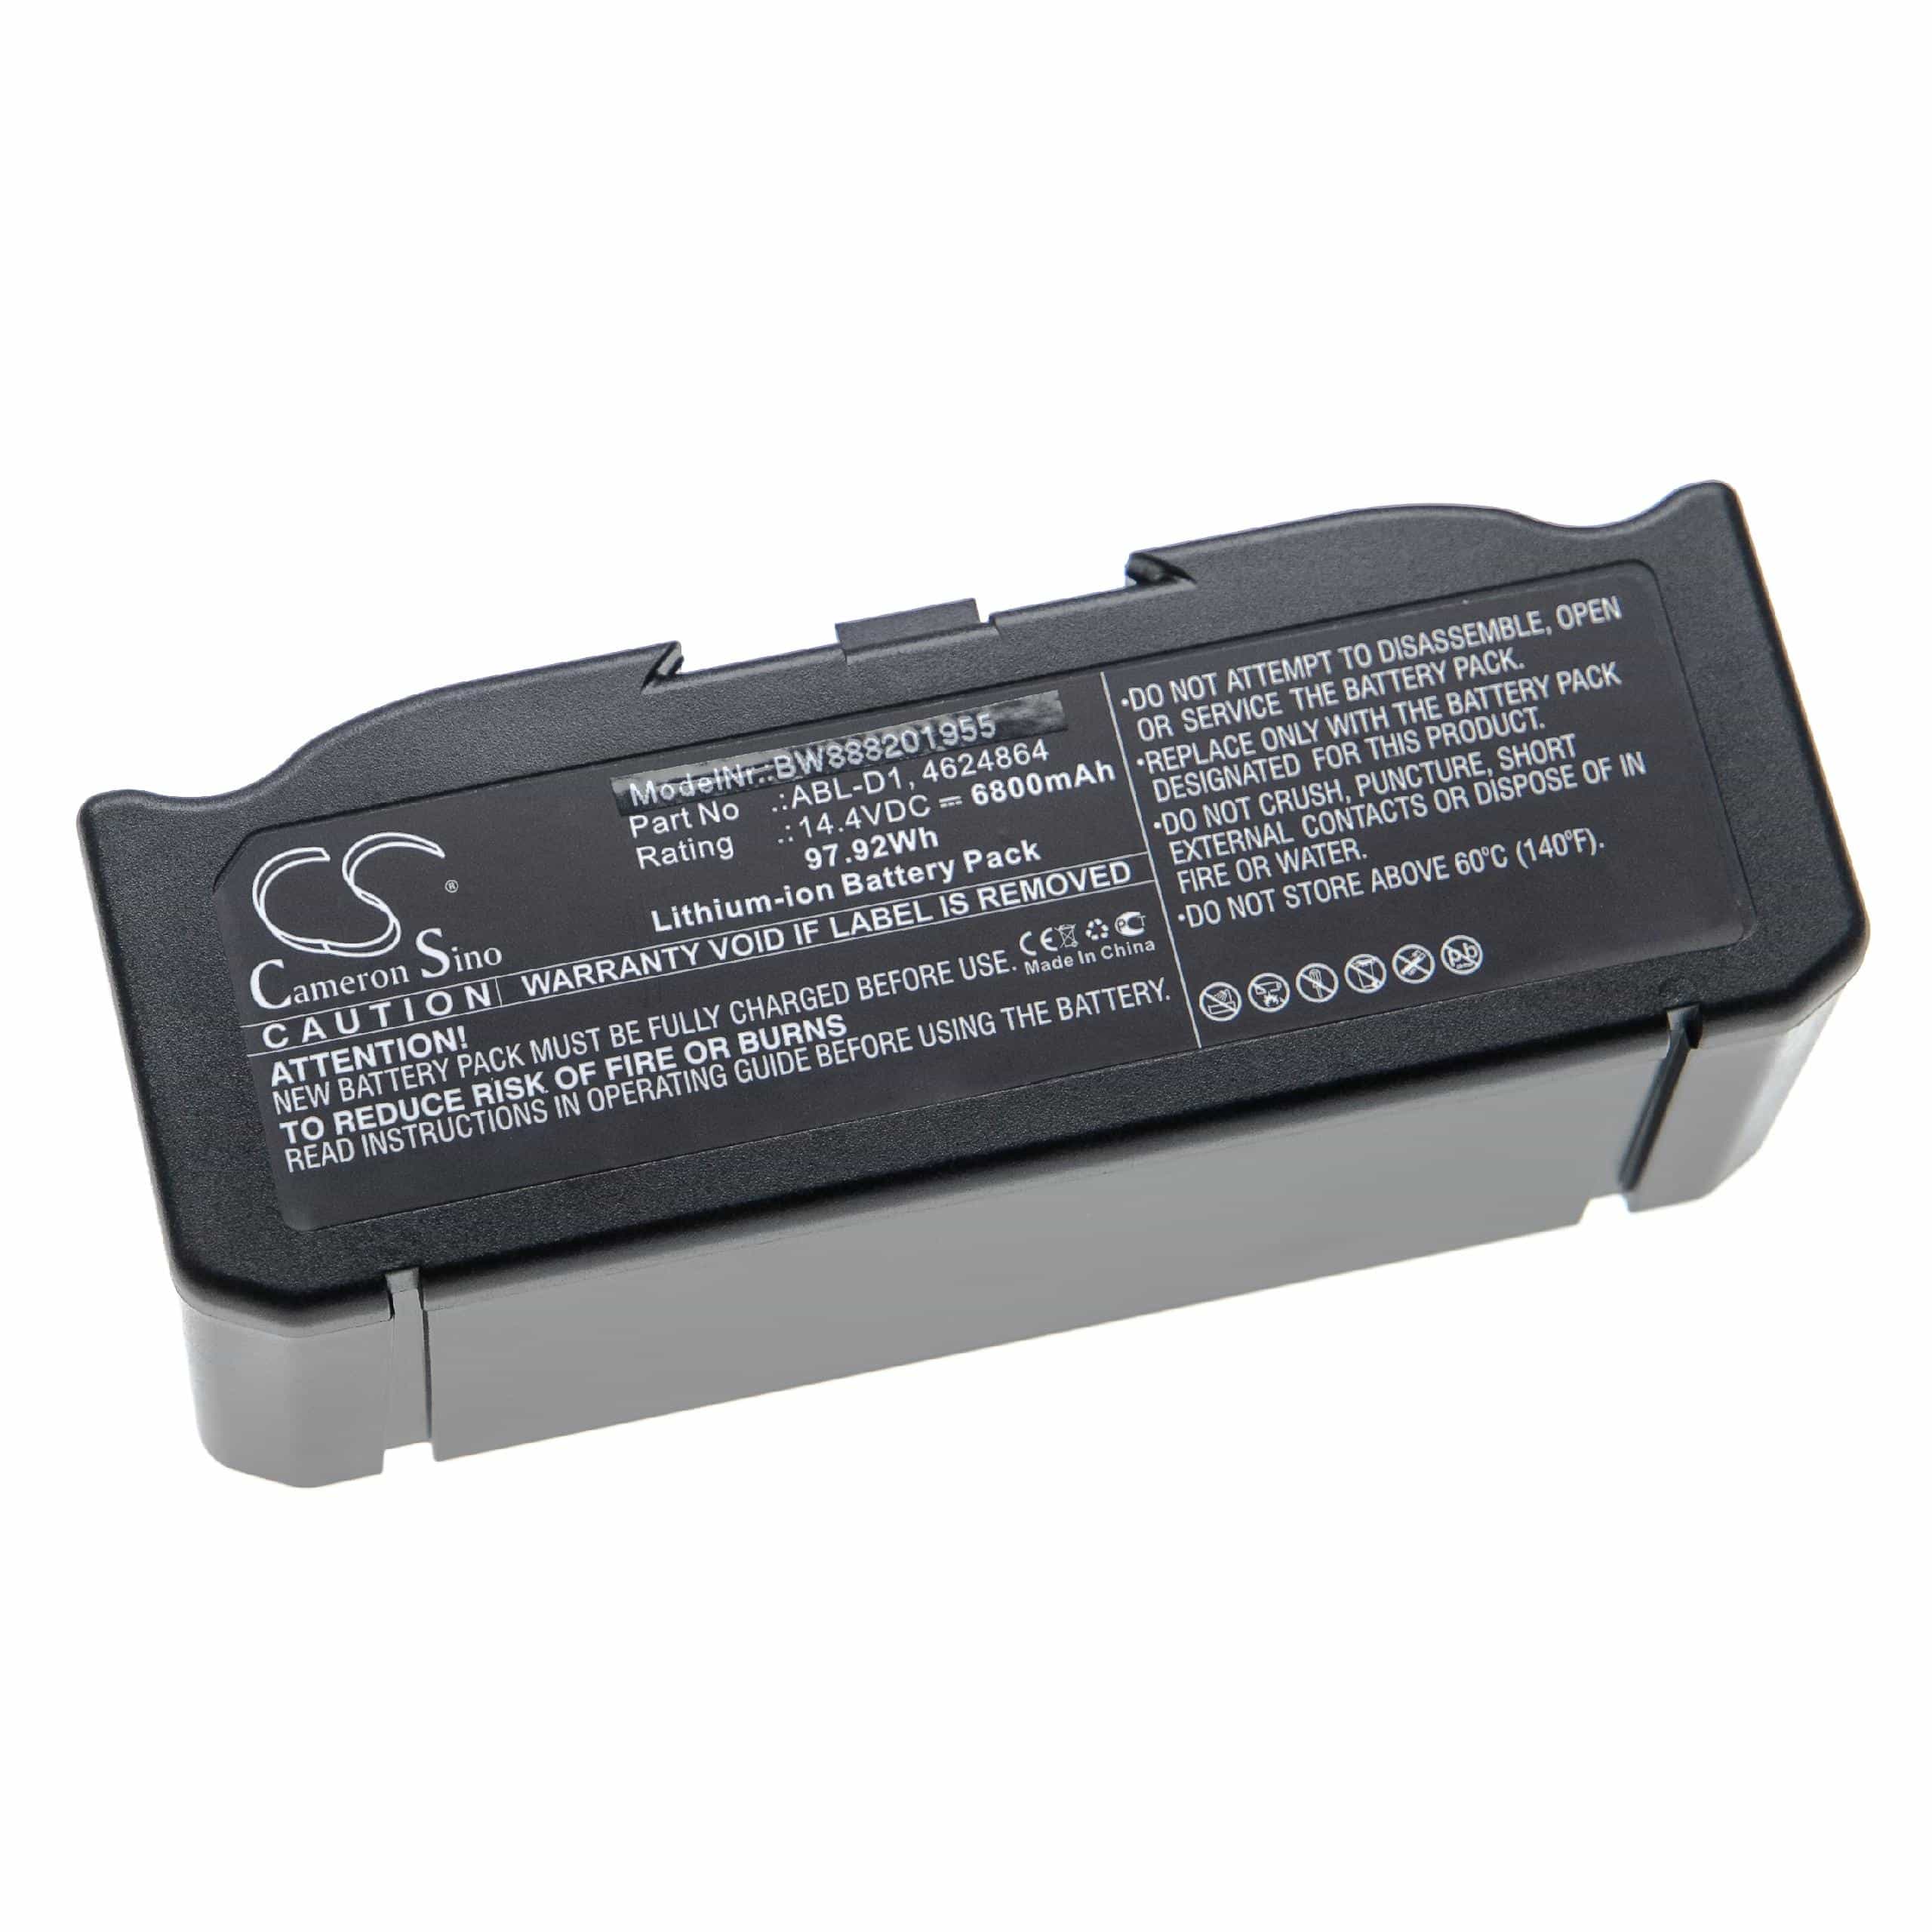 Battery Replacement for iRobot ABL-D2, ABL-D1, 4624864 for - 6800mAh, 14.4V, Li-Ion